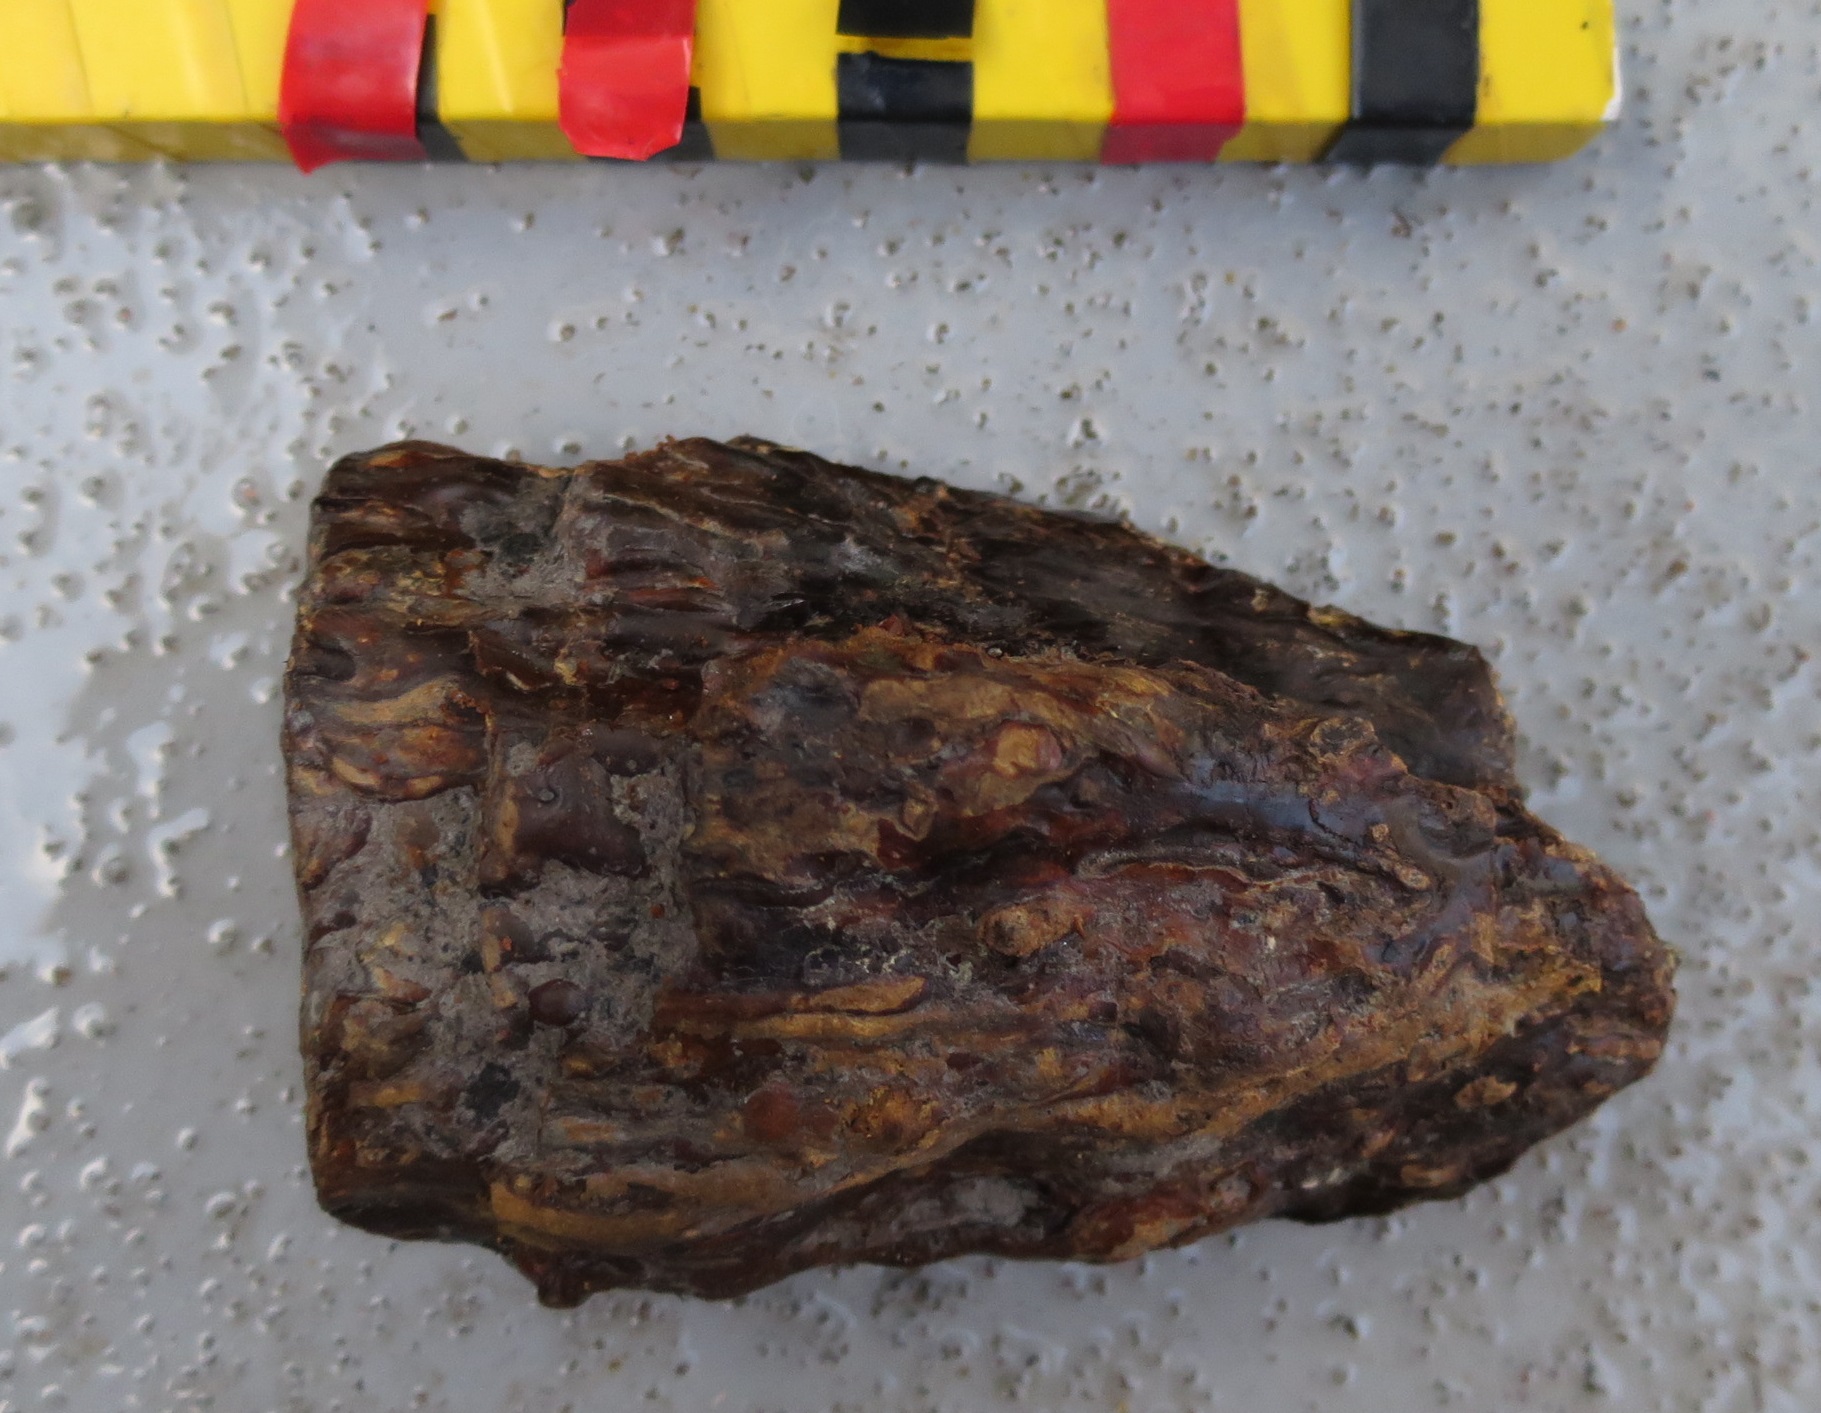 A lump of resin immediately after recovery from the wreck site.